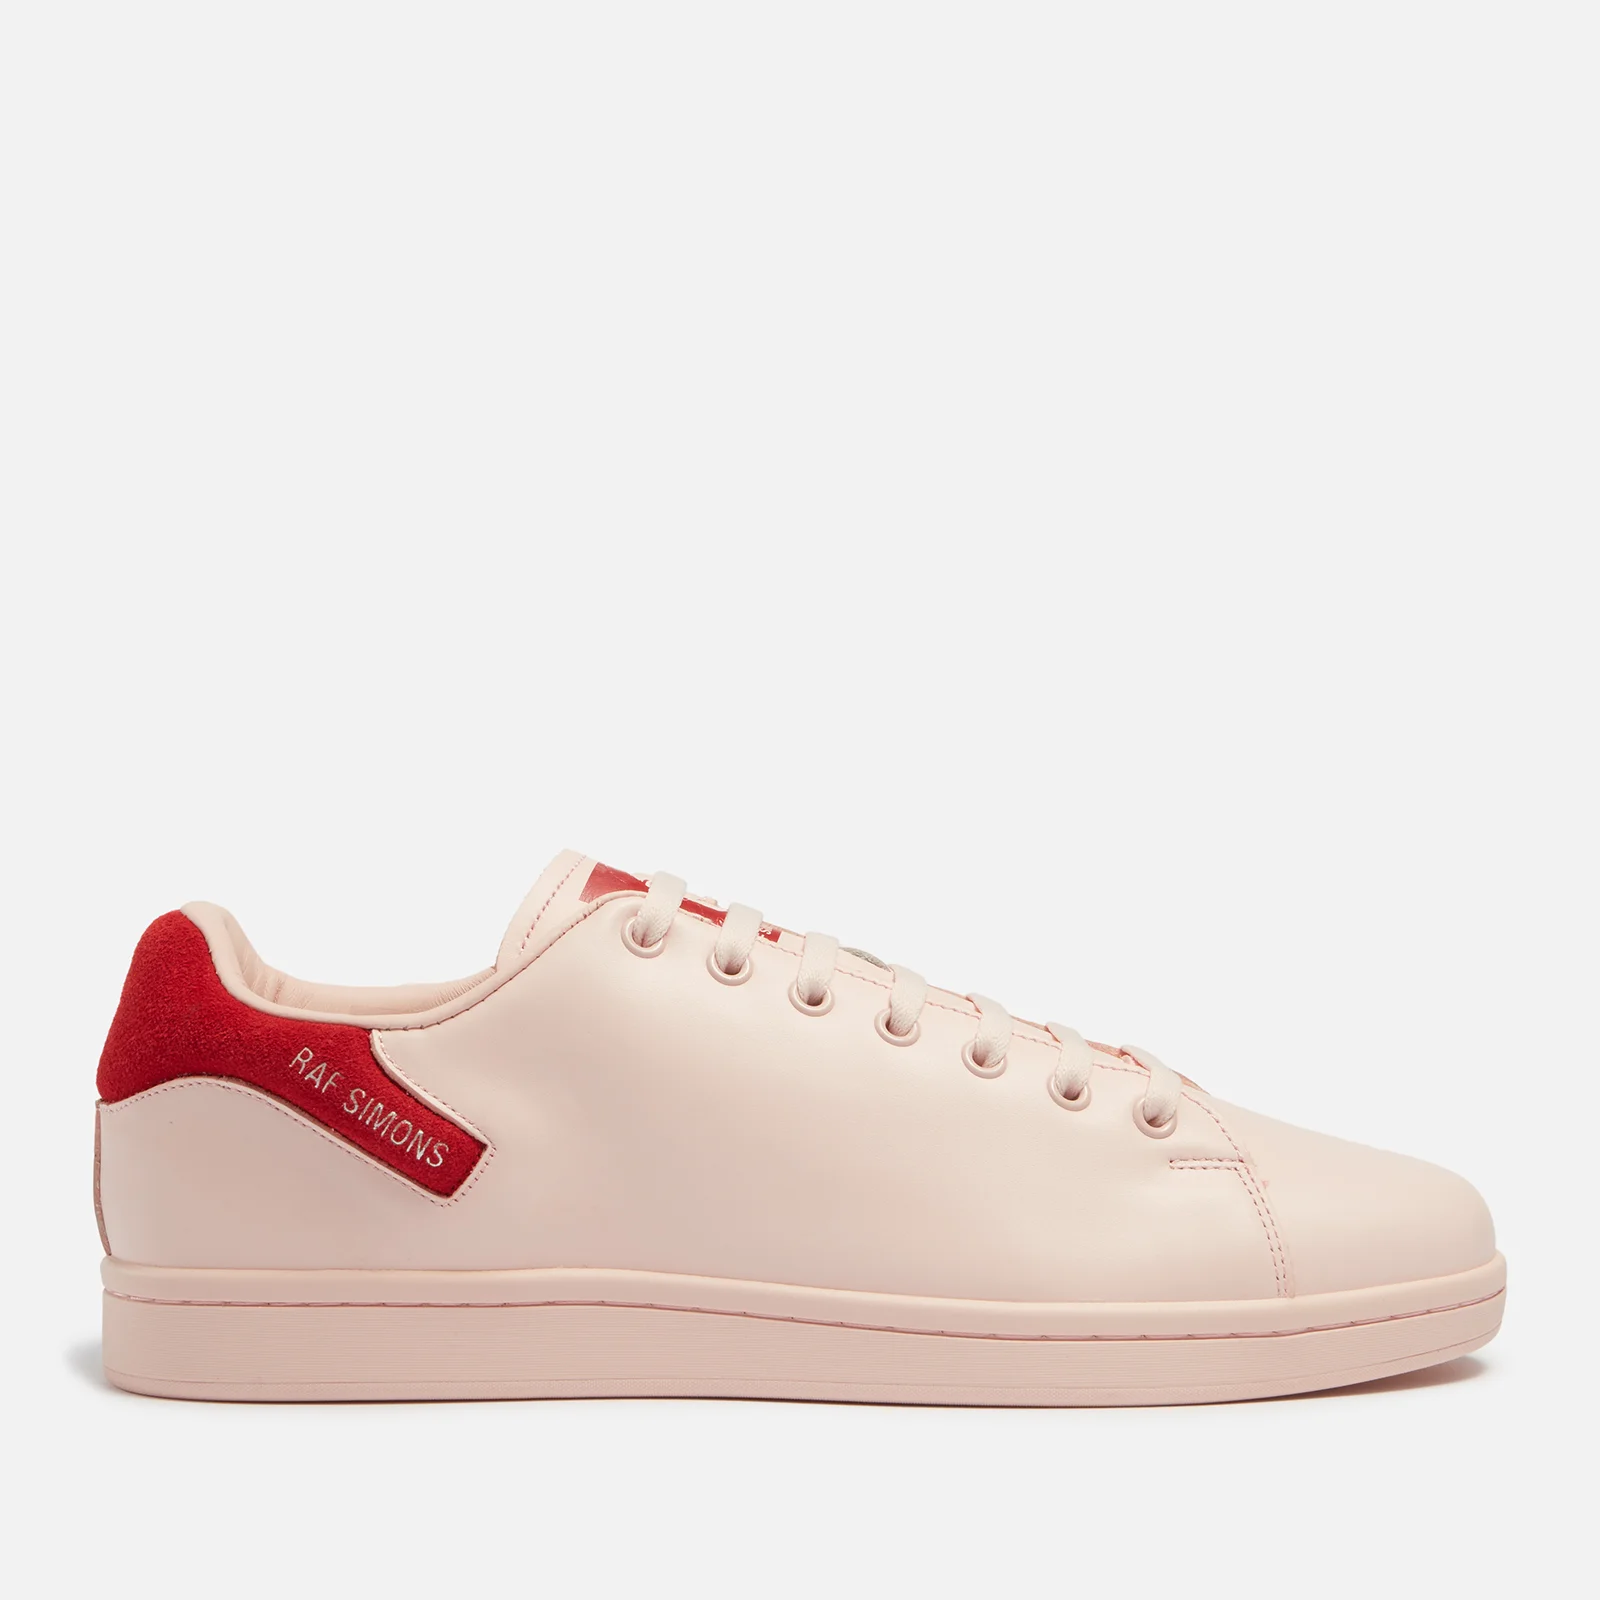 Raf Simons Men's Orion Trainers - Pastel Pink Image 1